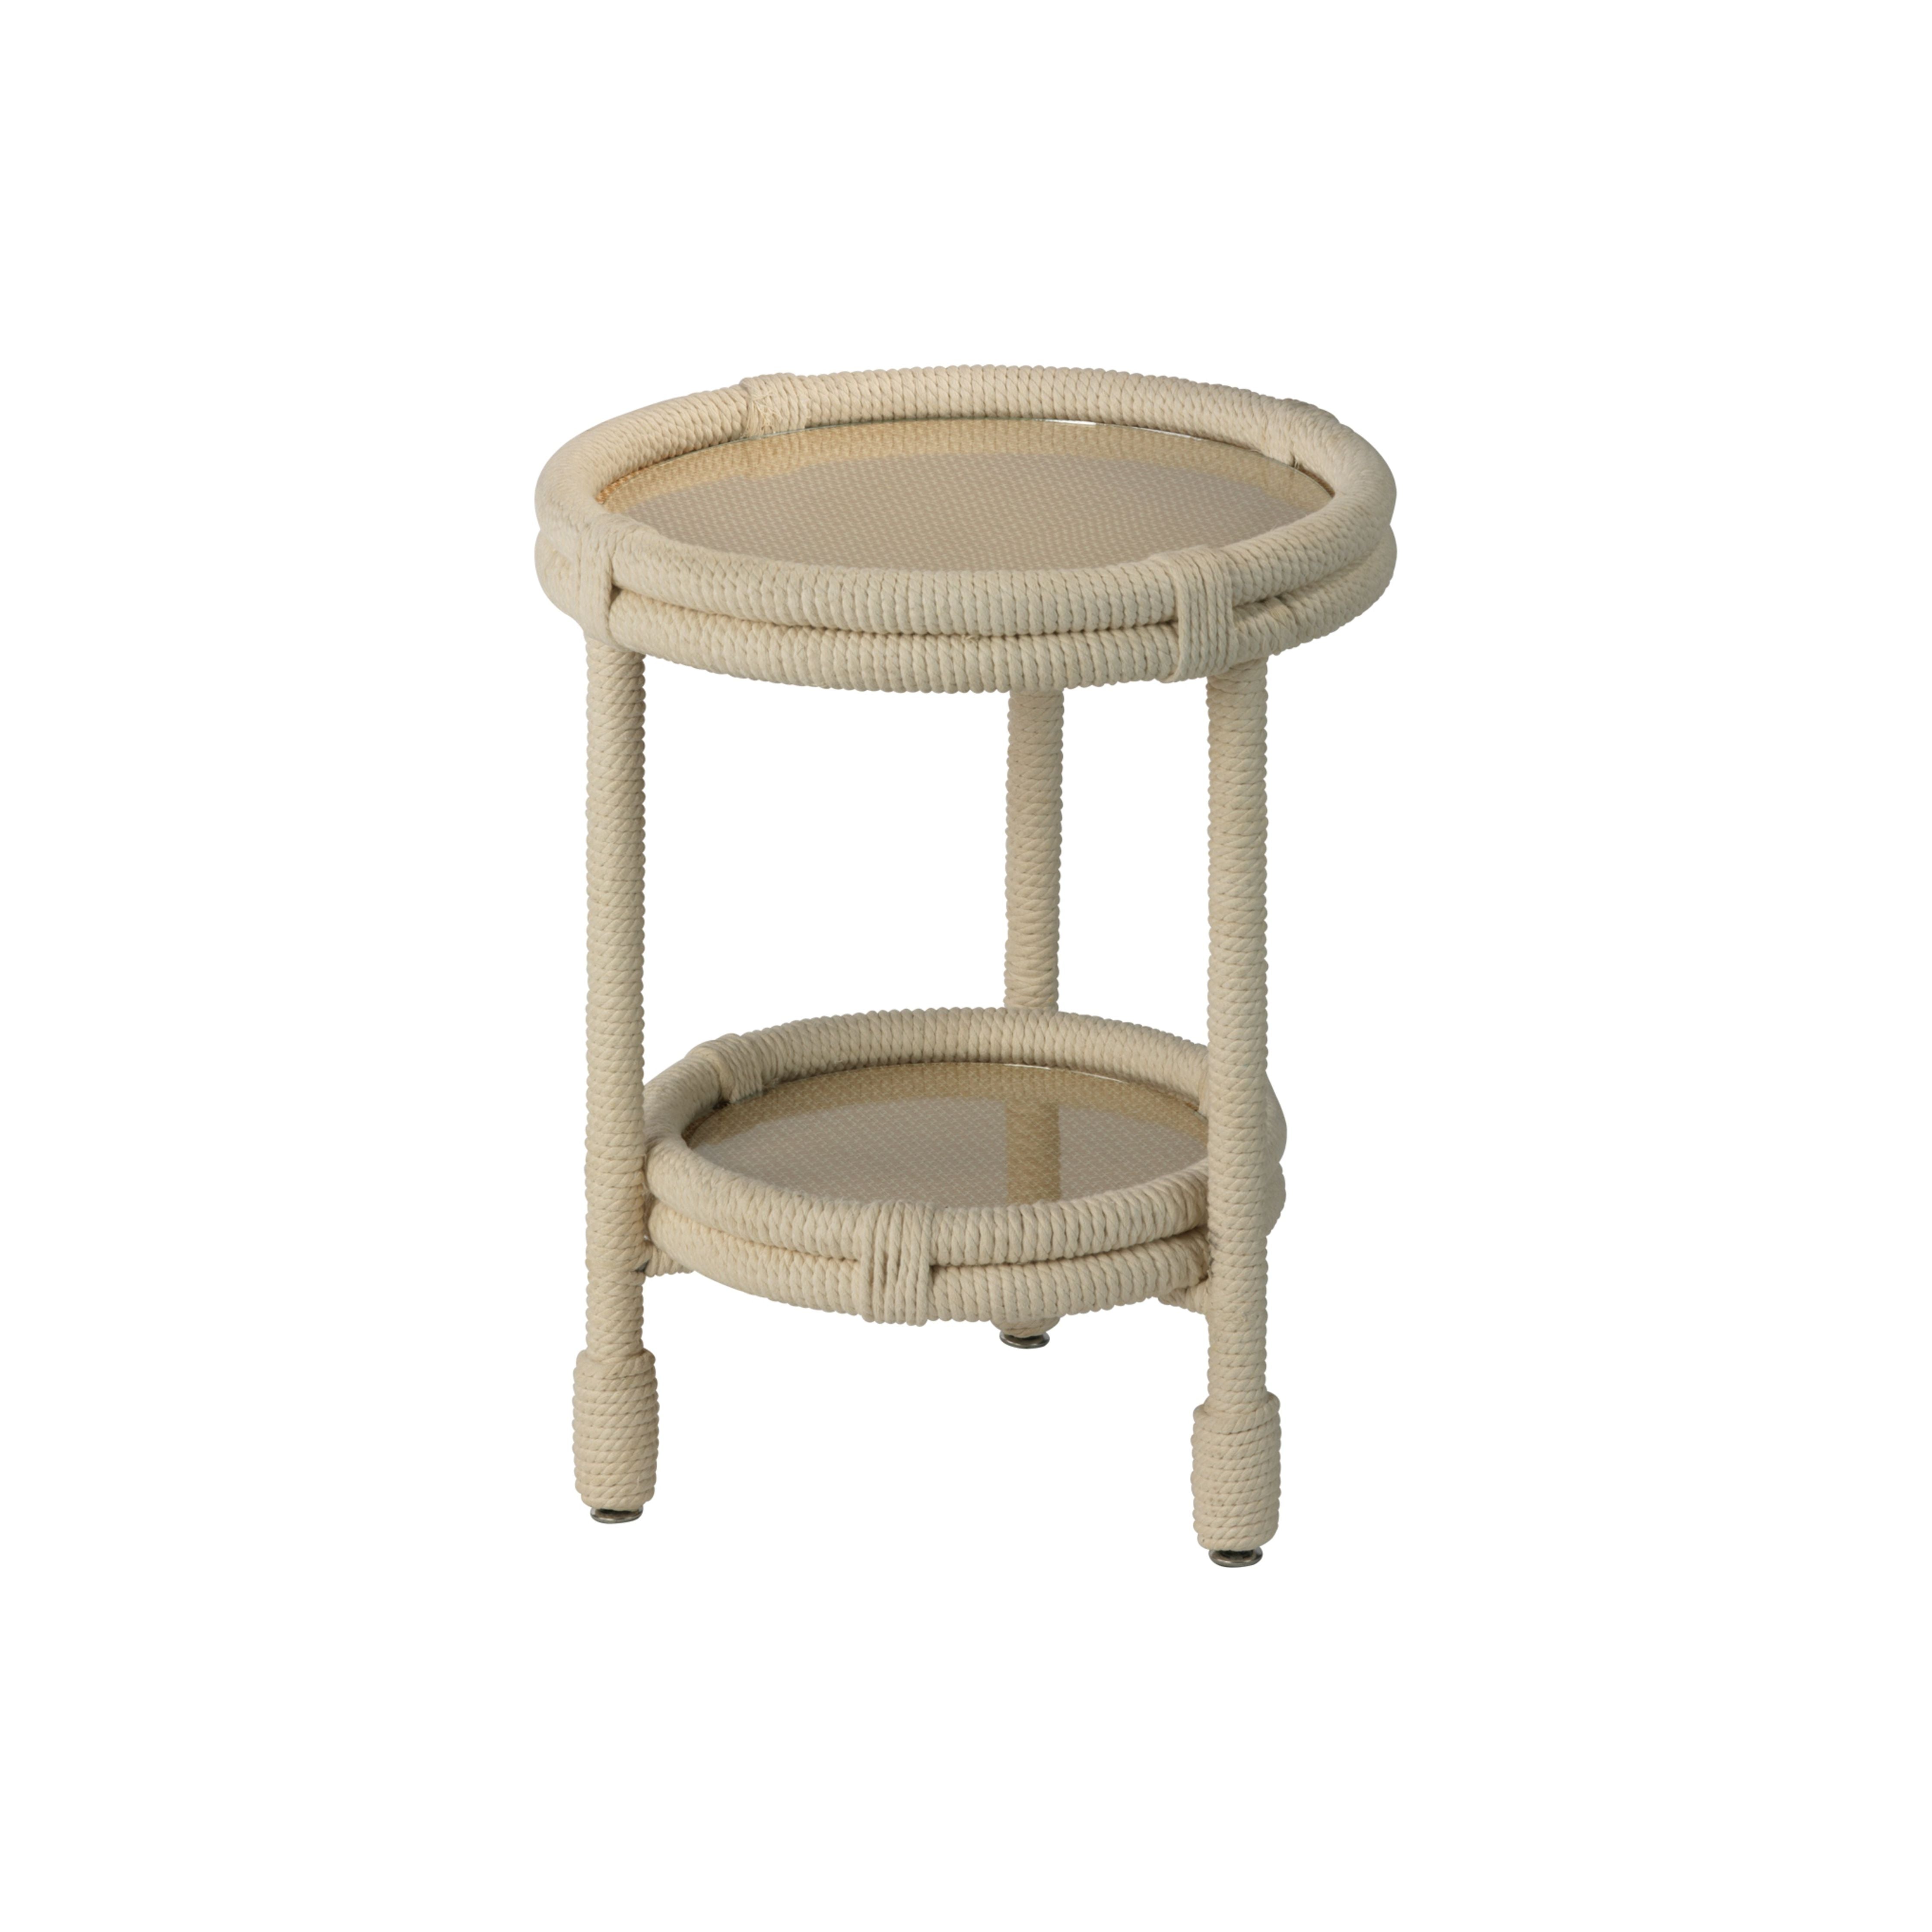 Jamie Young Company - 20DELT-STWH - Delta Side Table -  - Off-White